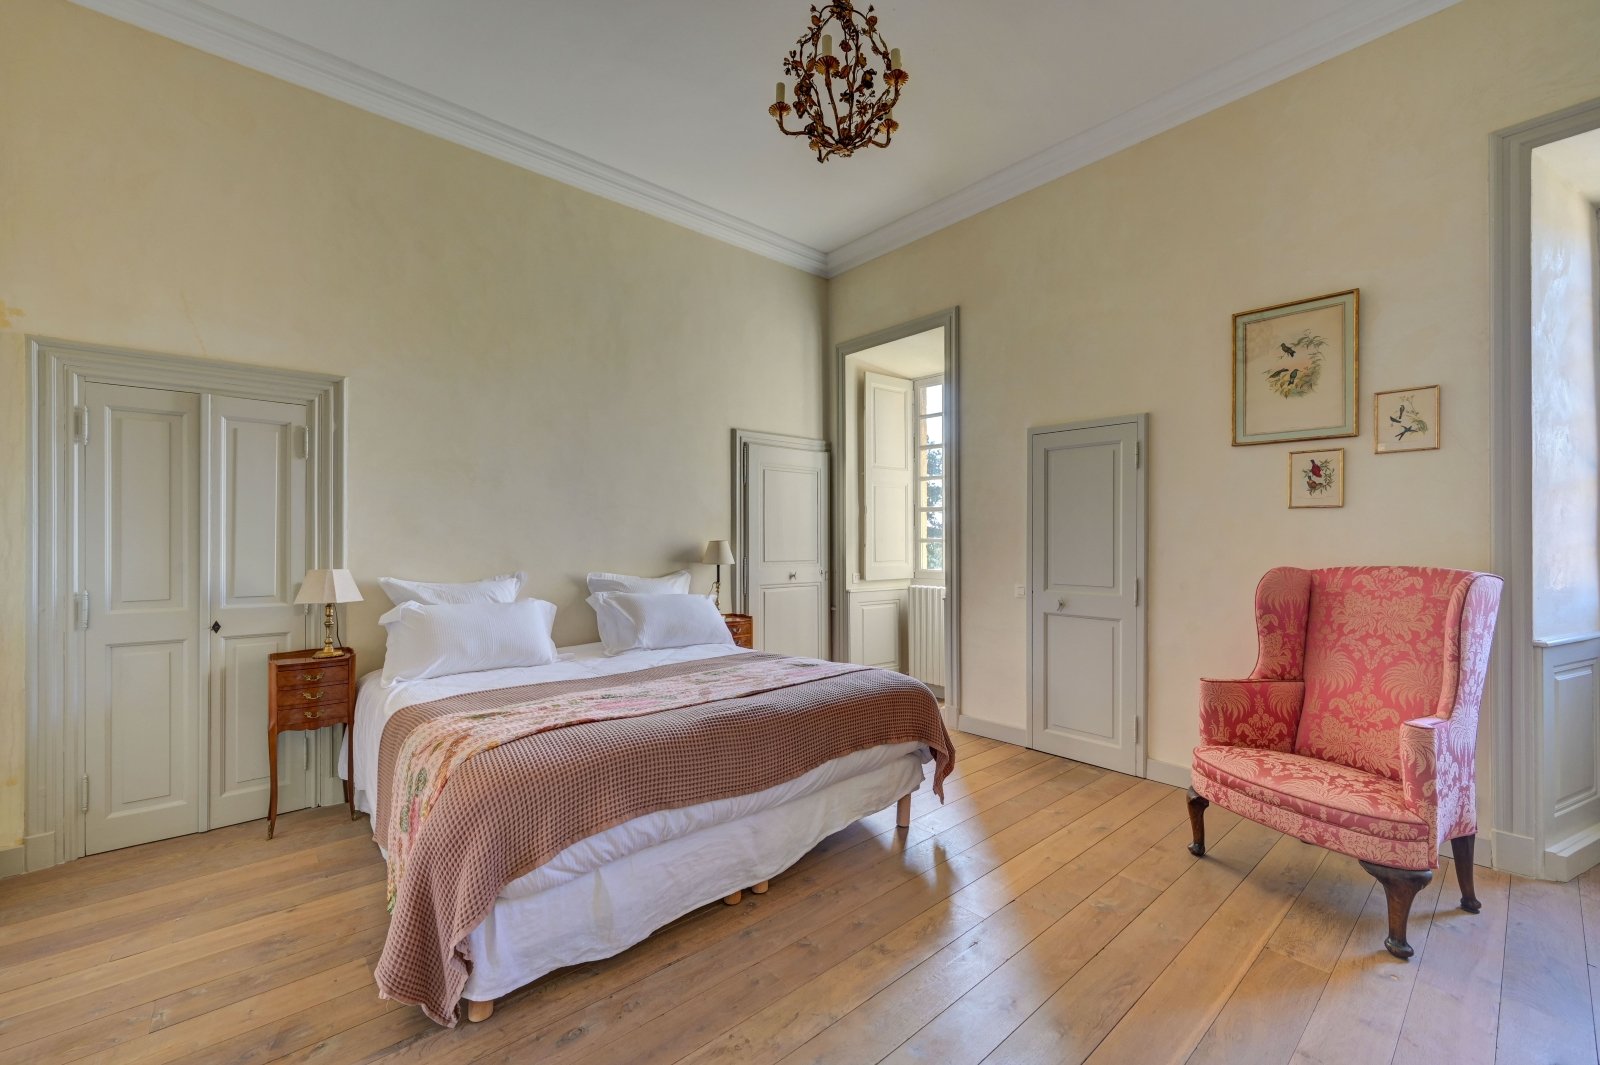 Large luxury chateau for rent in Uzes in the south of France